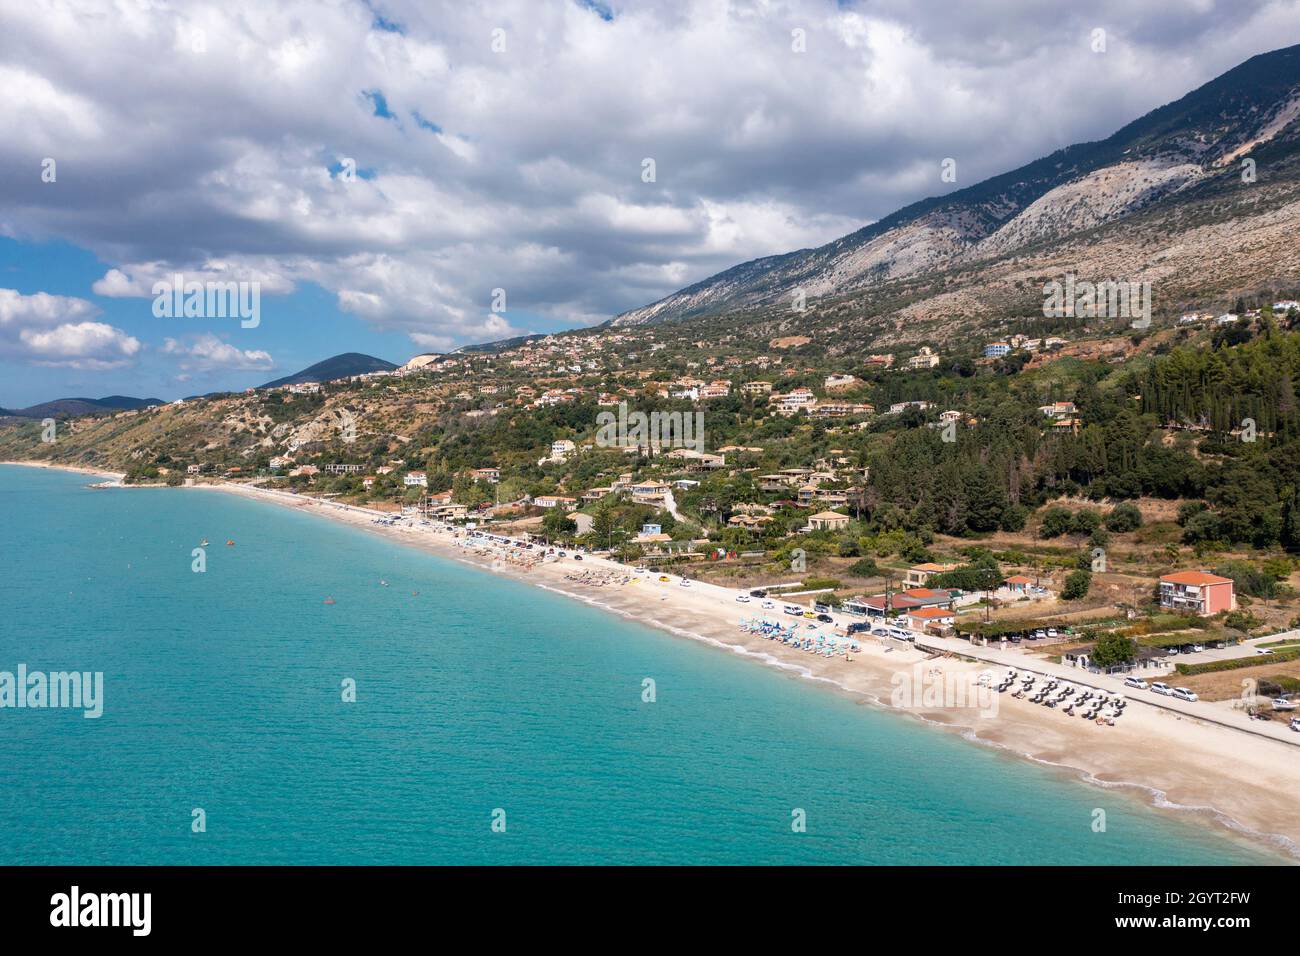 Aerial landscape view of Lourdas Beach on the south coast of Kefalonia, Ionian Islands, Greece Stock Photo